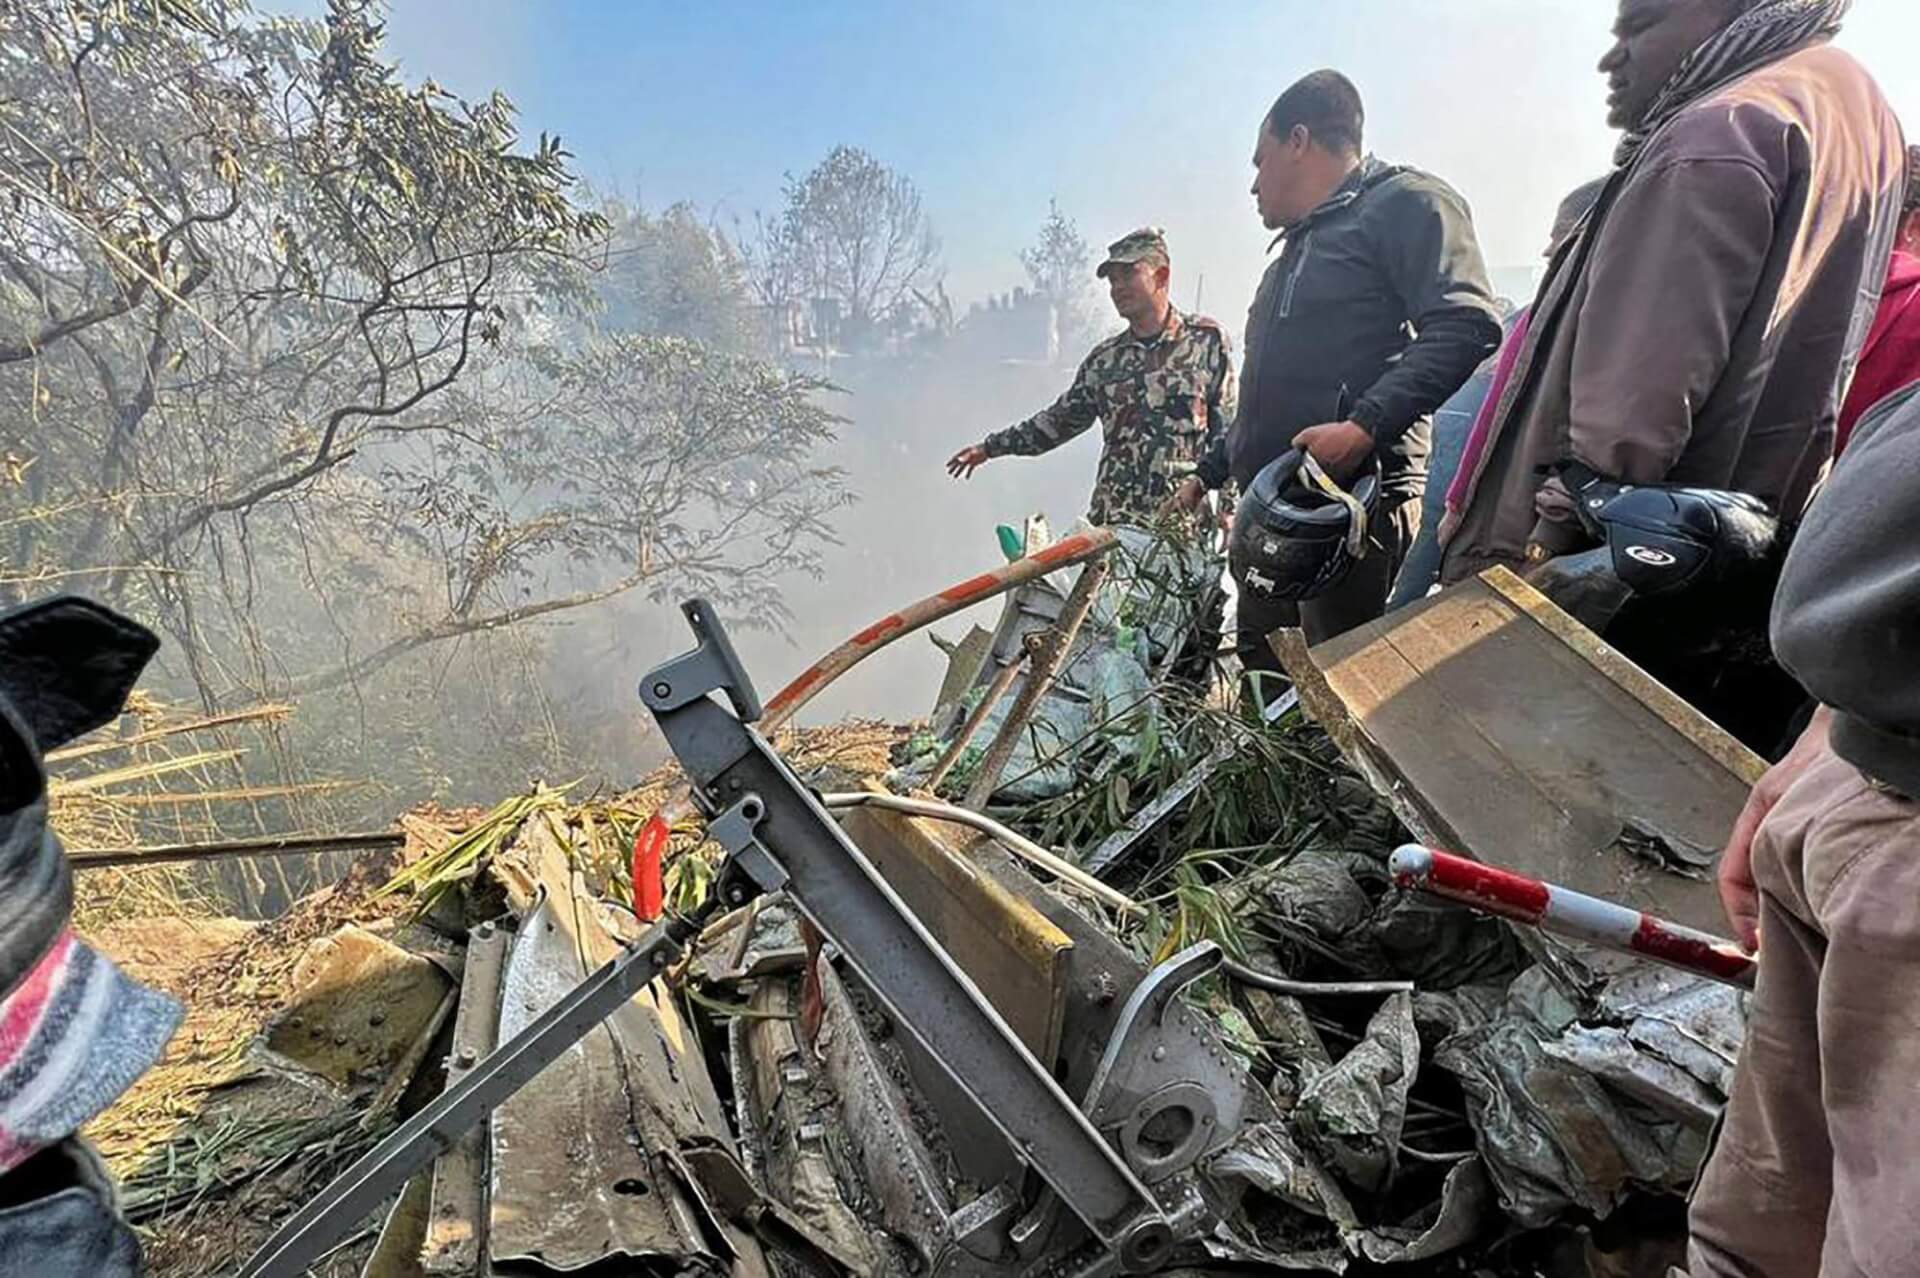 Nepal: Over 66 Killed in Deadliest Plane Crash in 30 Years